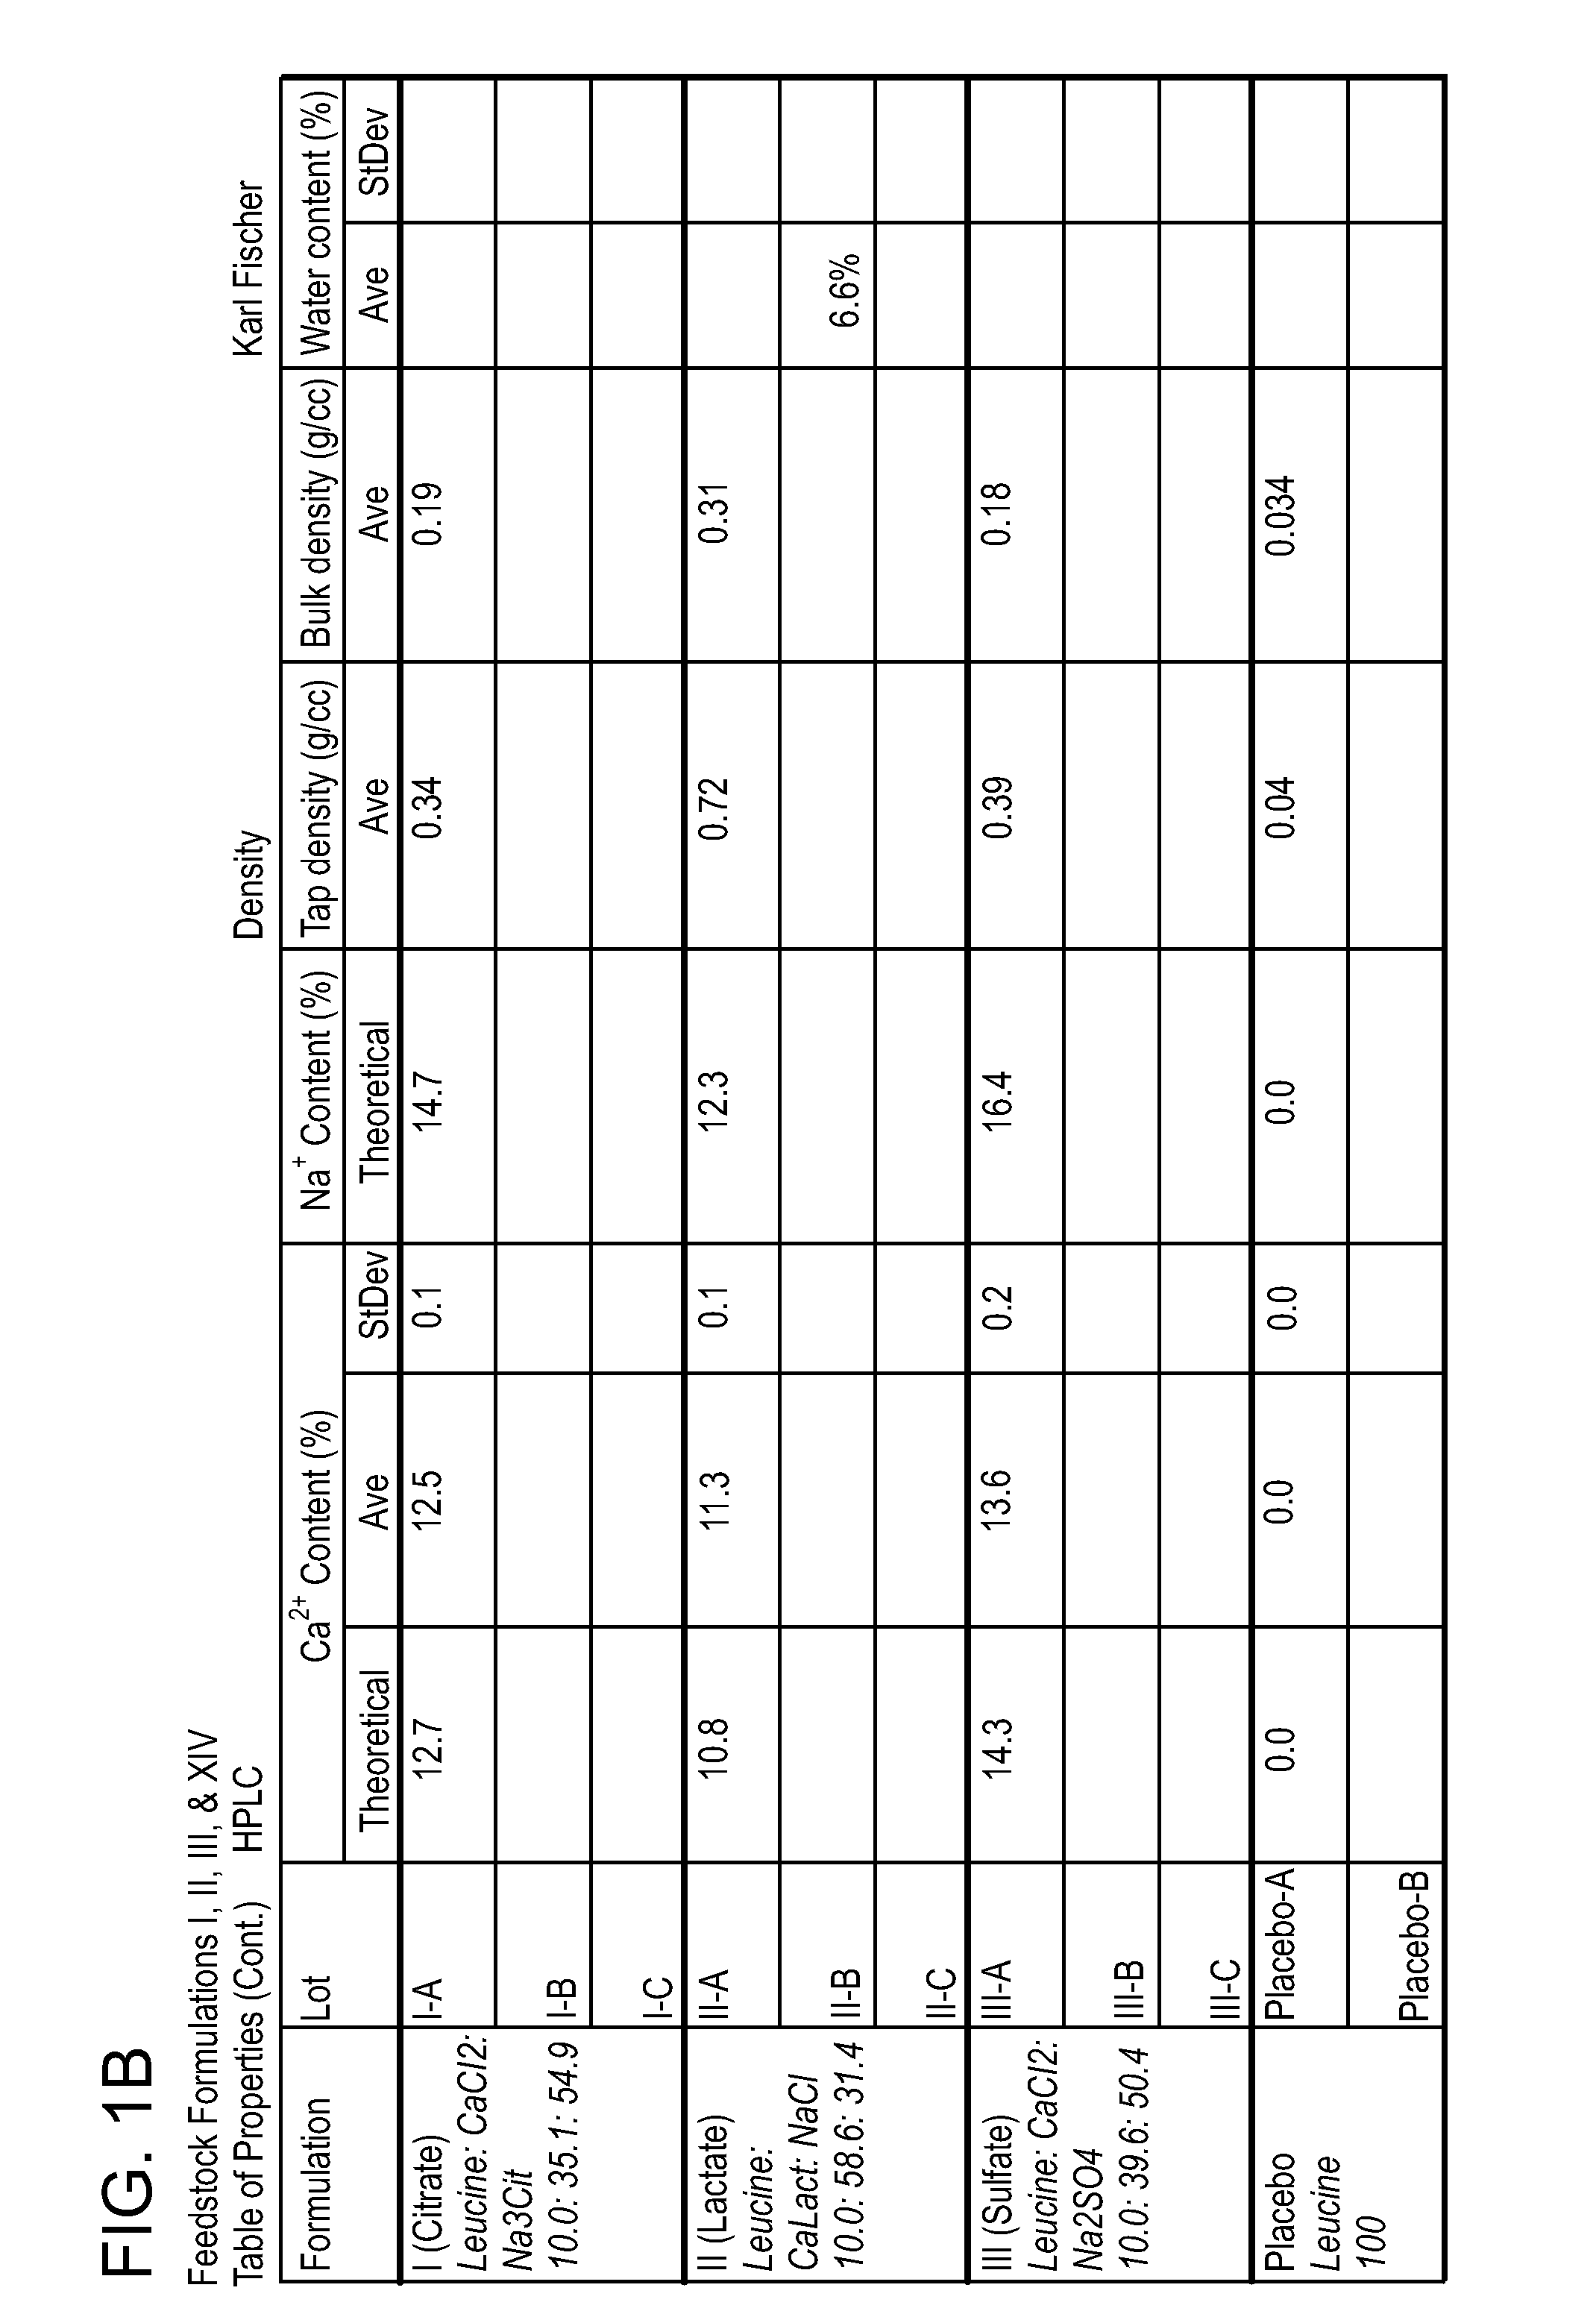 Dry powder formulations and methods for treating pulmonary diseases